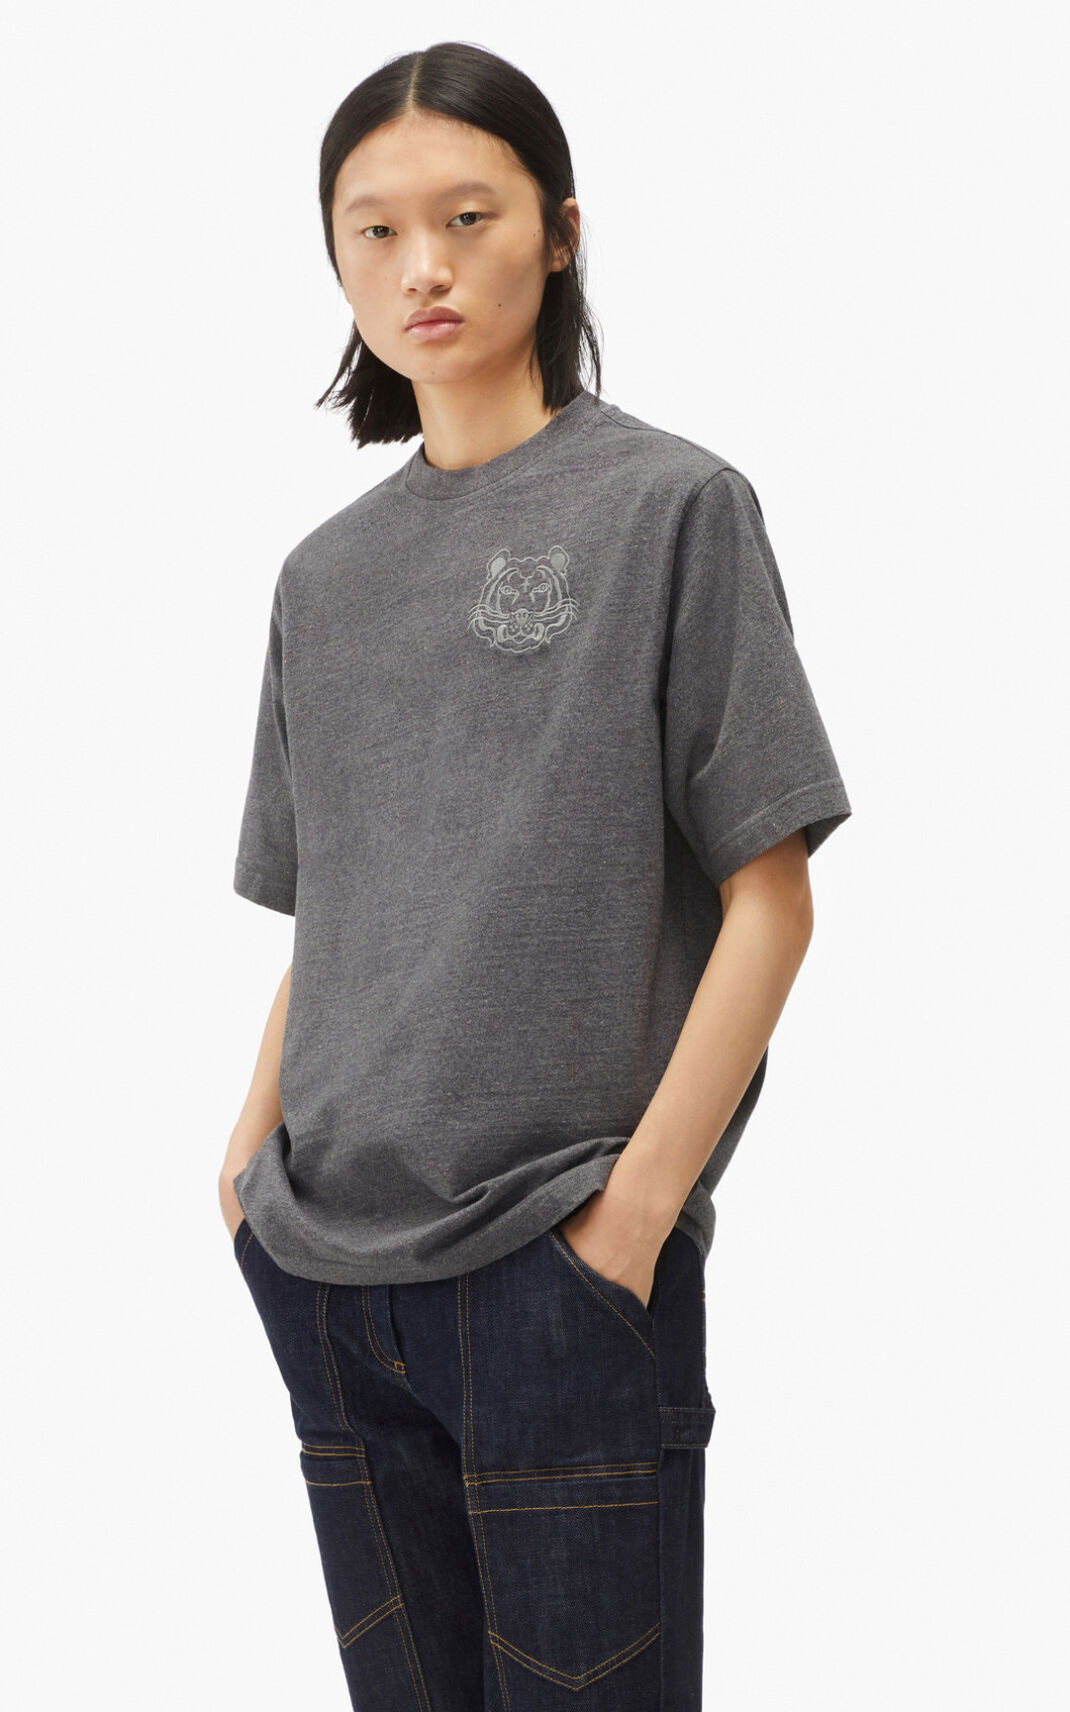 Camisetas Kenzo RE/relaxed casual Mujer Gris Oscuro - SKU.6030745